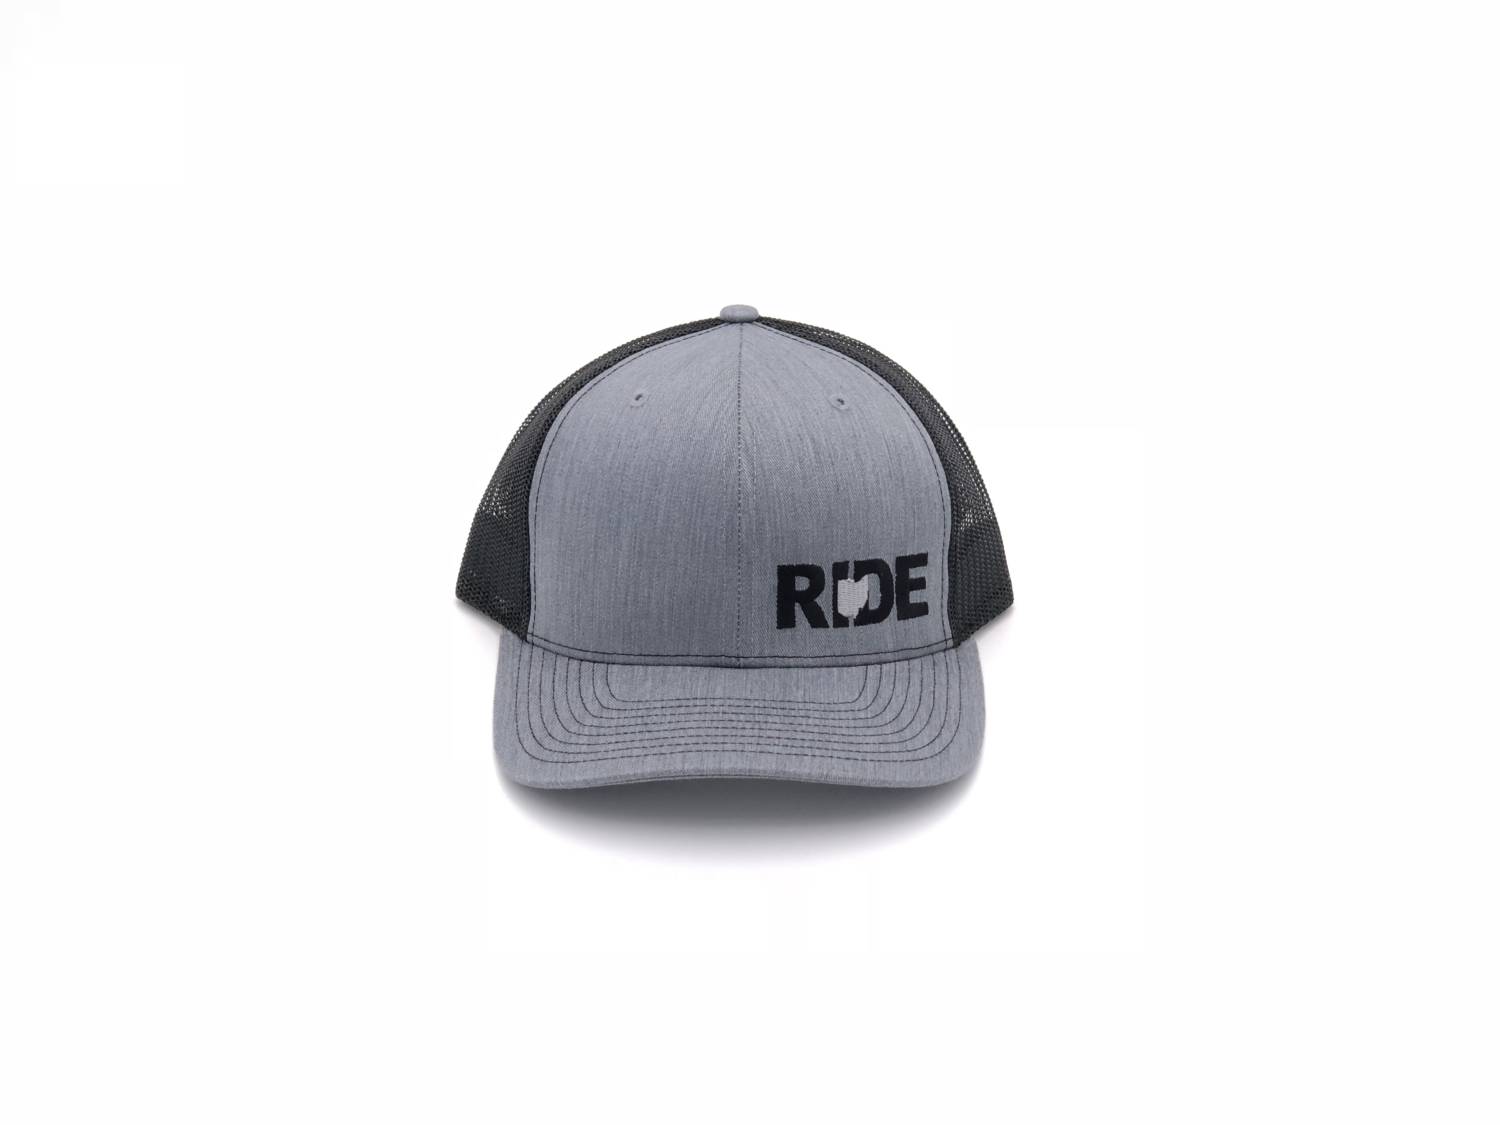 Ride Ohio Night Out Pro Embroidered Snapback Trucker Hat Heather Gray/Black